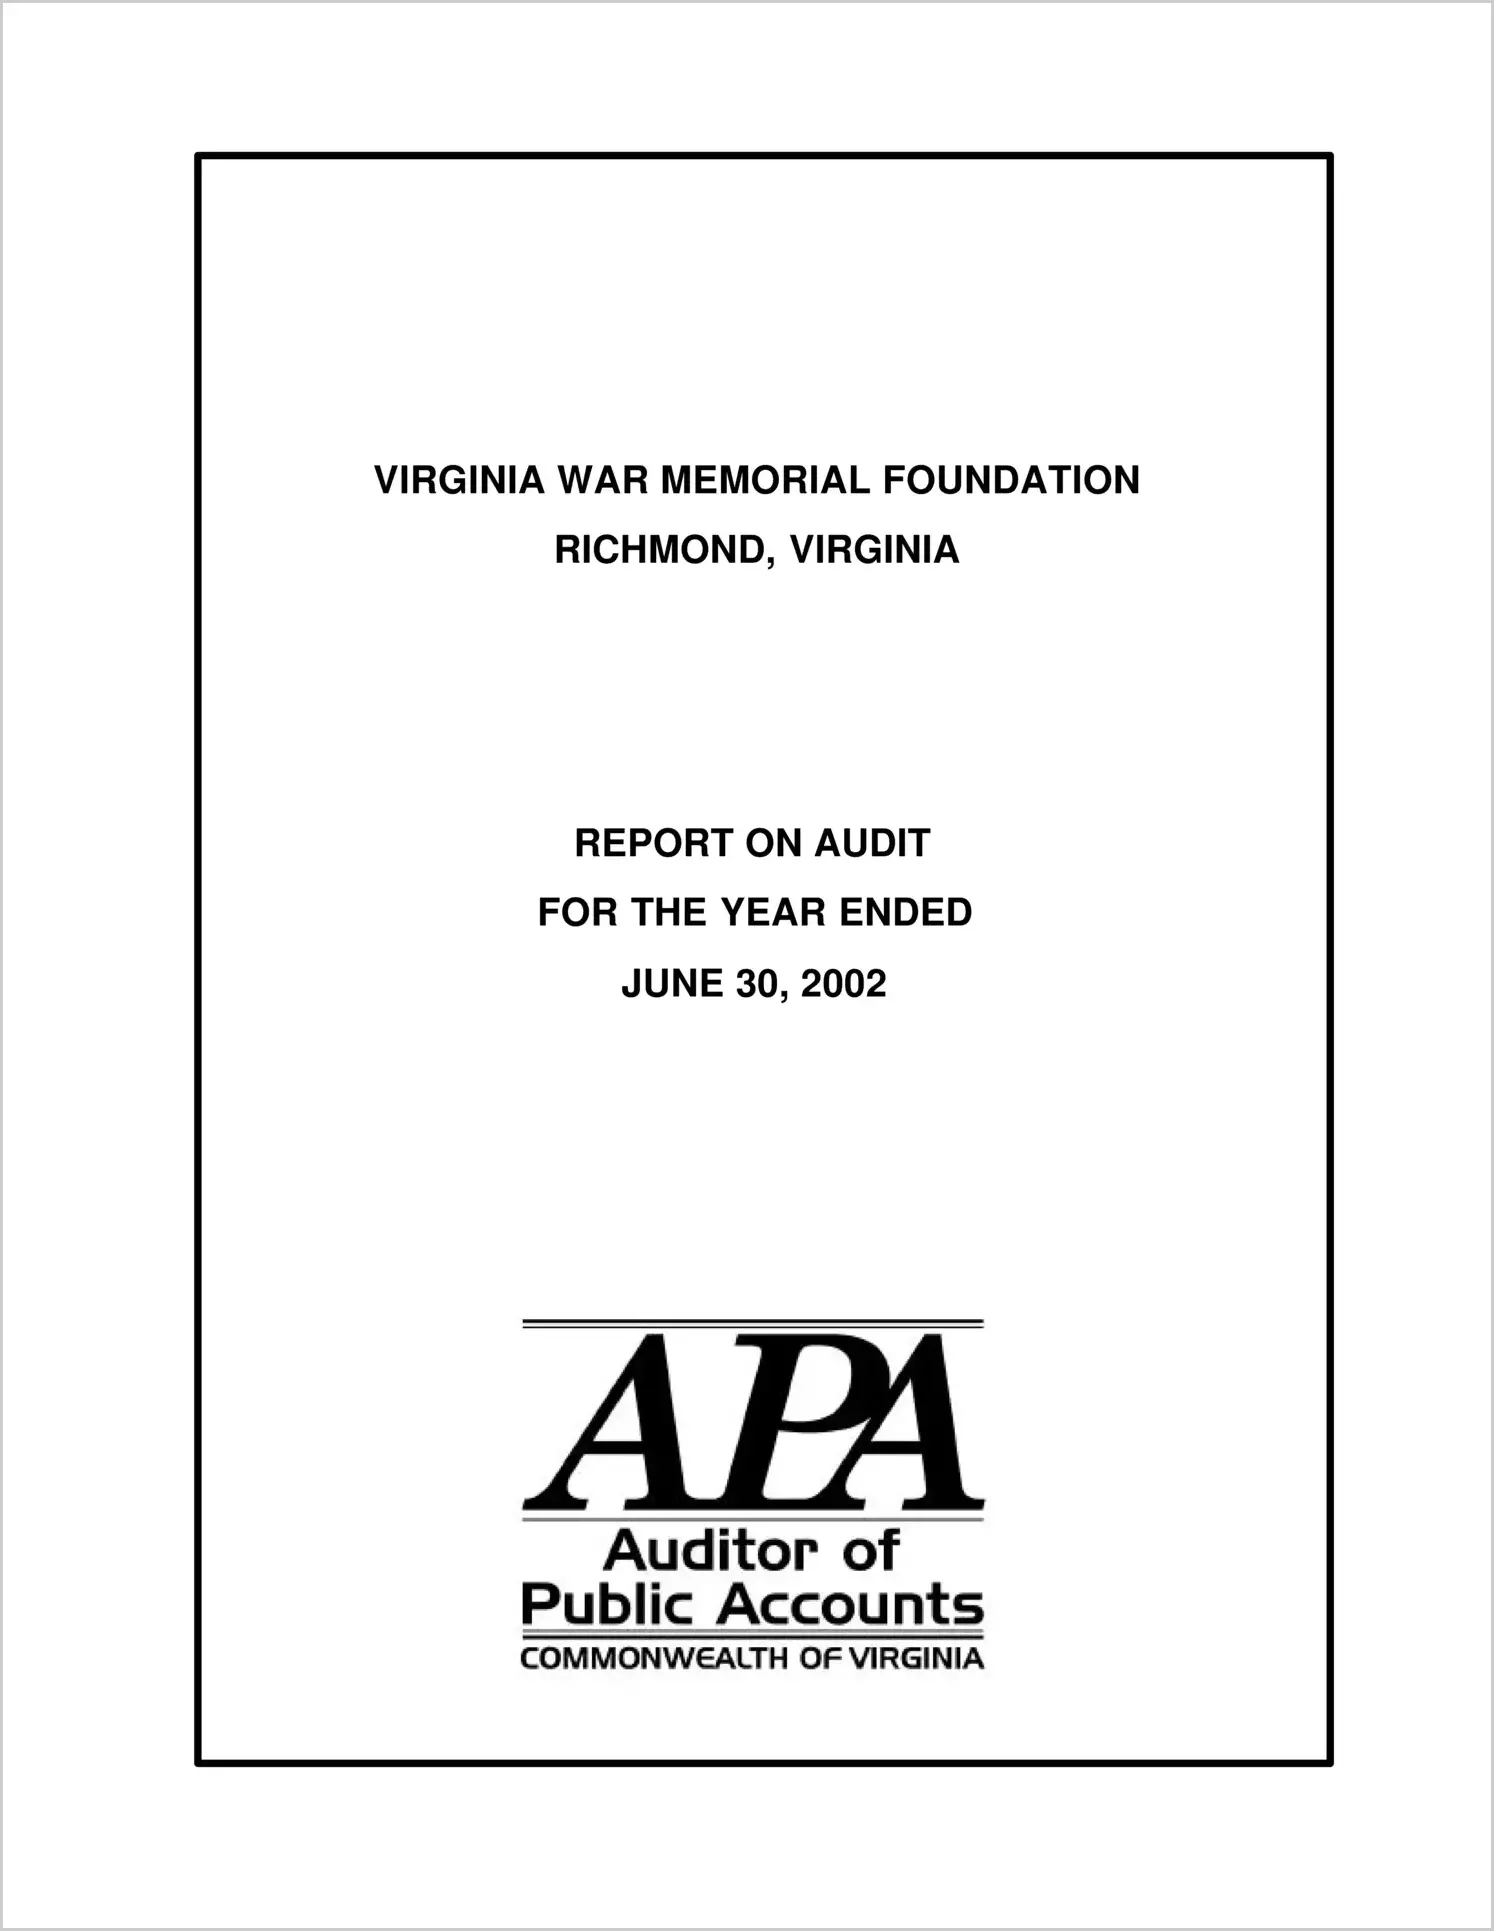 Virginia War Memorial Foundation for the year ended June 30, 2002